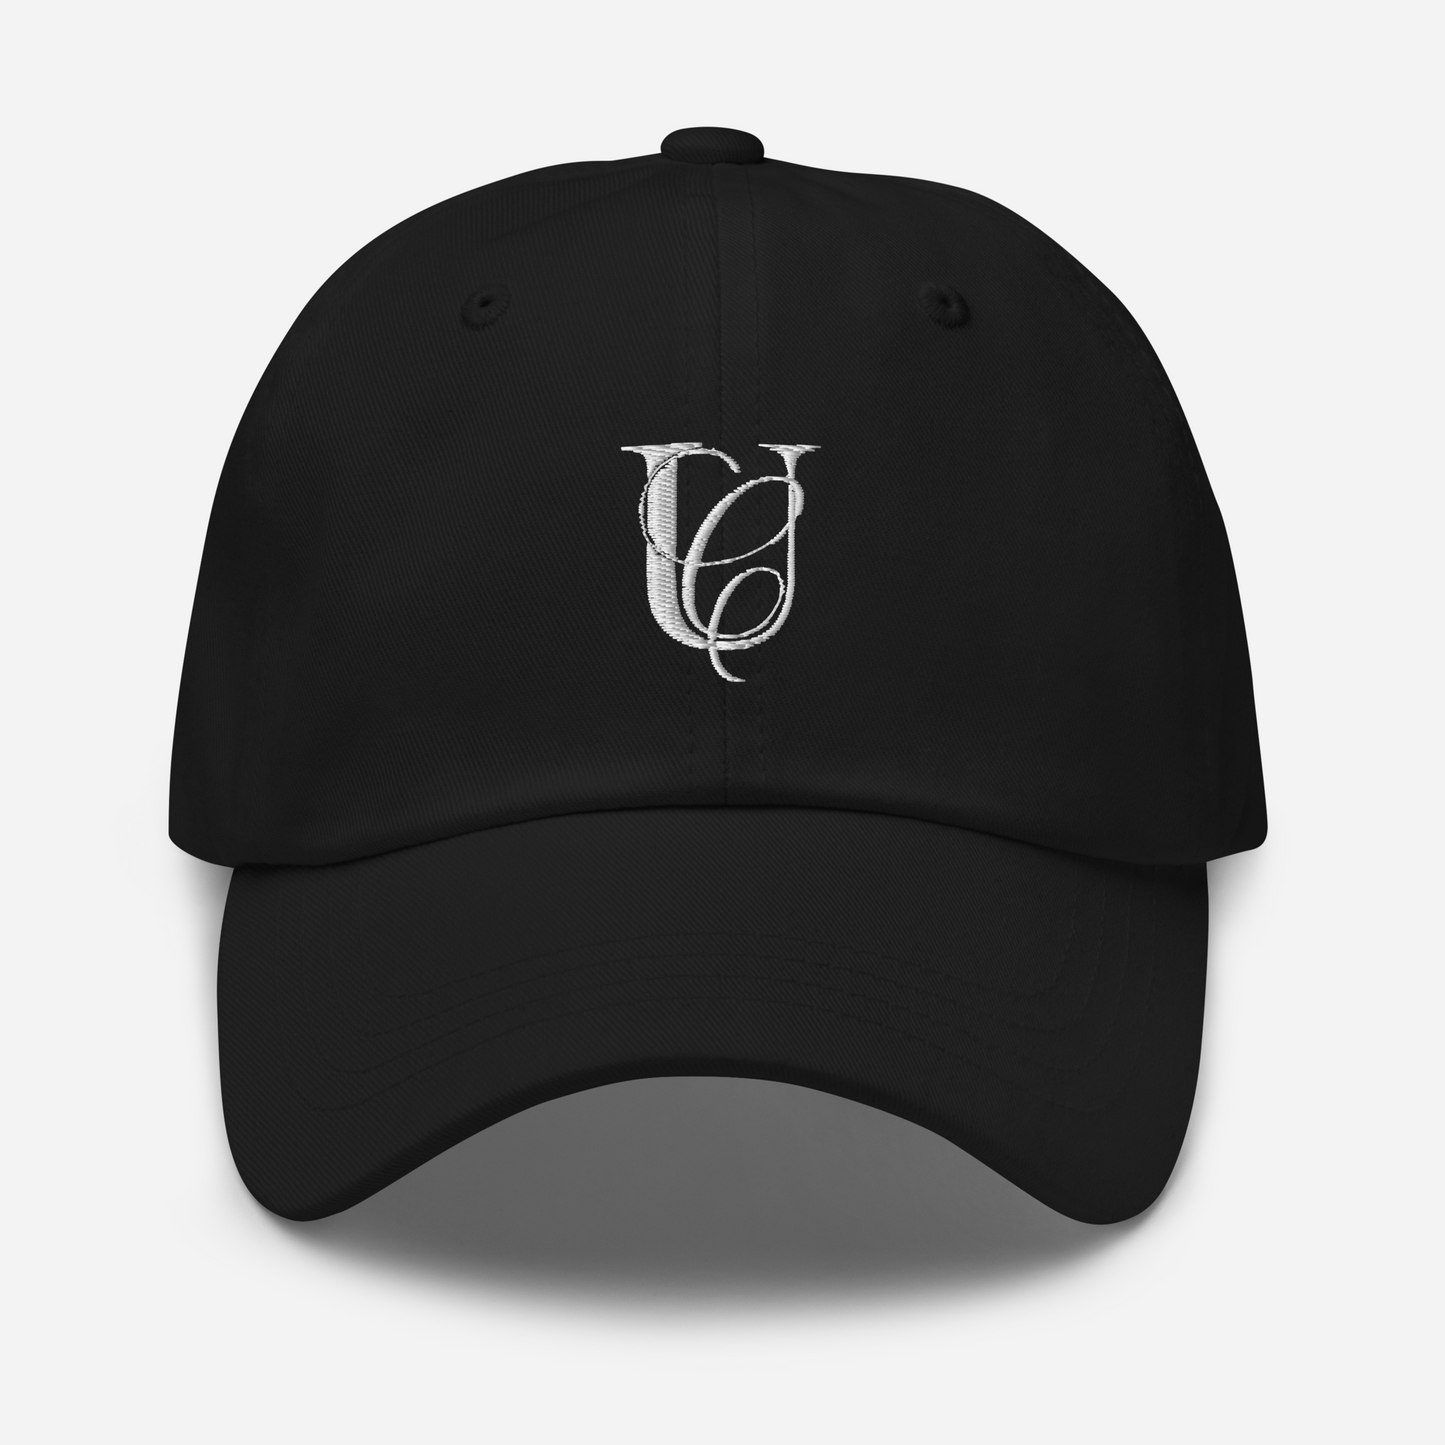 UC Embroidery Cap